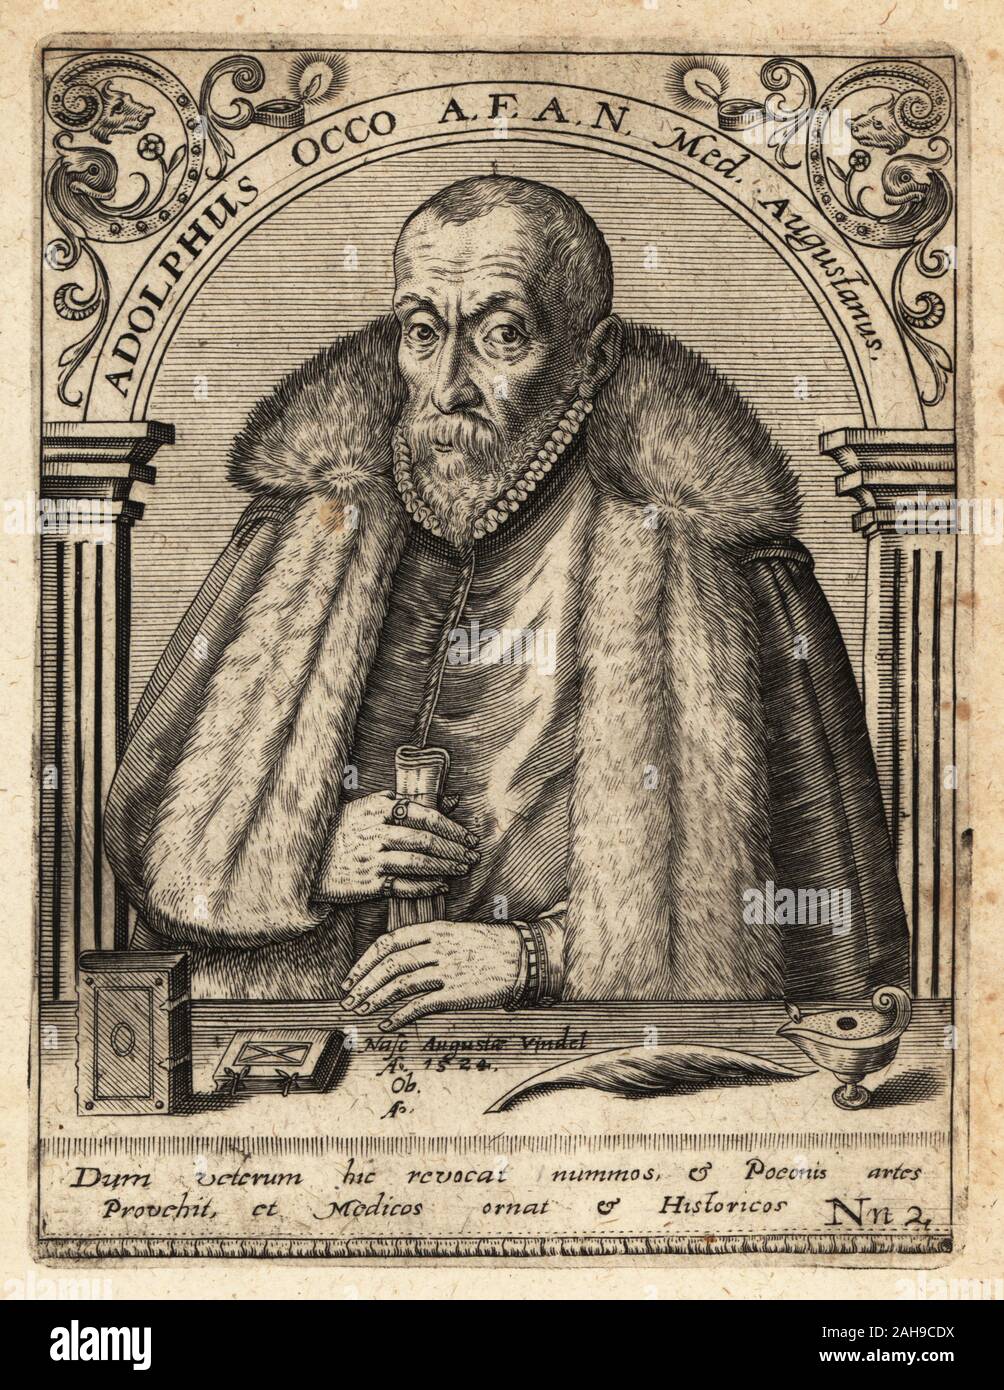 Adolphe Occo or Adolf Occo, physician, humanist and numistatist, 1524-1606. Adolphus Occo A.F.A.N. Medicus Augustanus. Copperplate engraving by Johann Theodore de Bry from Jean-Jacques Boissard’s Bibliotheca Chalcographica, Johann Ammonius, Frankfurt, 1650. Stock Photo